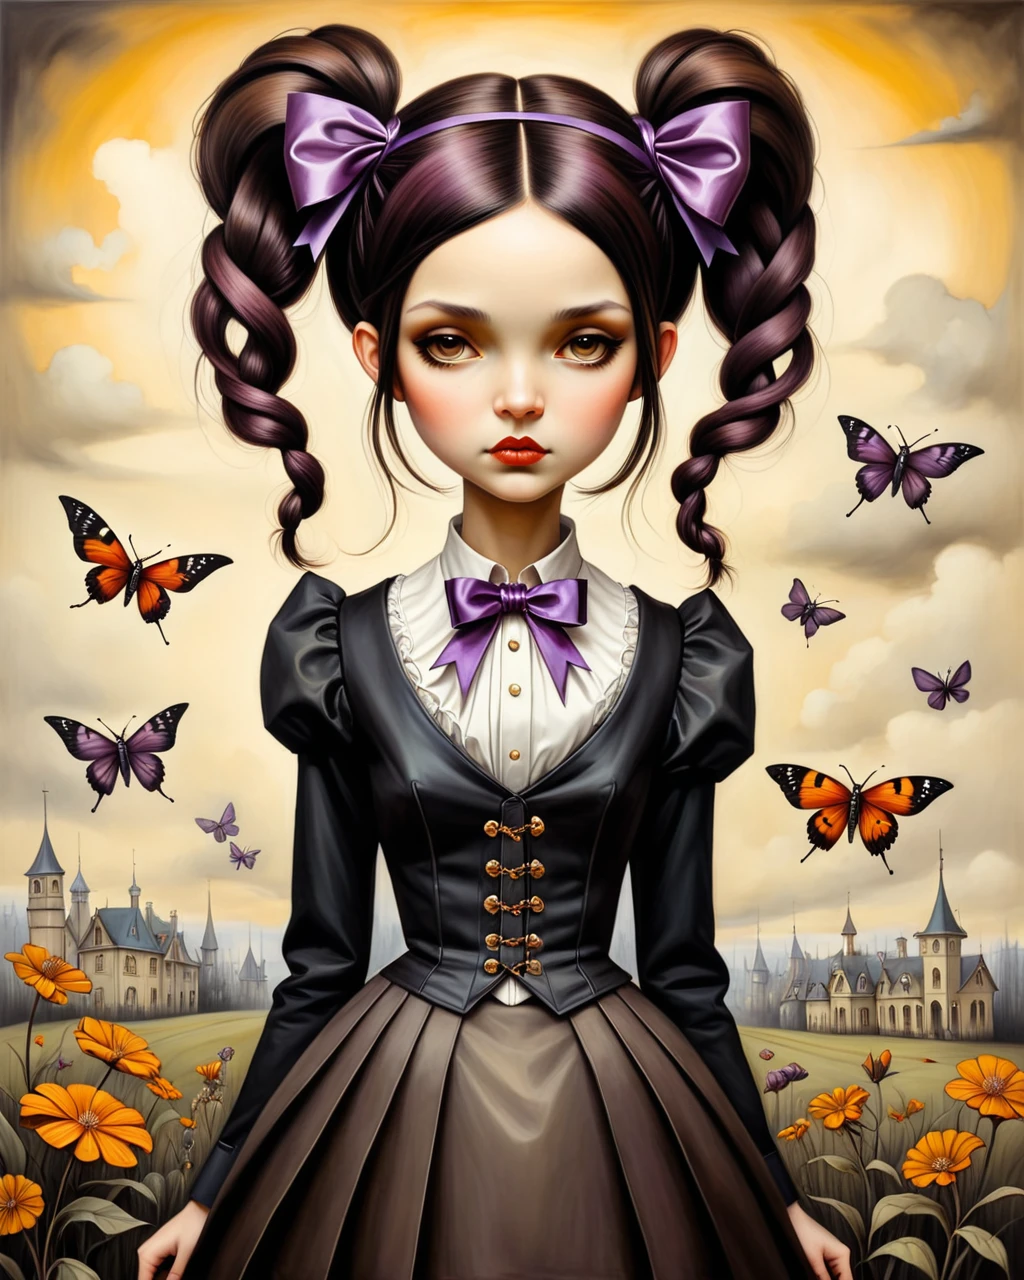 VIOLET BAUDELAIRE LEMONY SNICKET A SERIES OF UNFORTUNATE EVENTS GIRL WITH LONG BROWN HAIR PURPLE RIBBON BLUNT BANGS EDWARDIAN VICTORIAN GOTHIC STEAMPUNK INVENTOR origami style in the style of Исав Эндрюс,Исав Эндрюс style,Исав Эндрюс art,Исав Эндрюсa painting of a girl gothic wednesday addams pale black hair two braids style of Исав Эндрюс, Эндрю Исао, художественный стиль, inspired Исав Эндрюс, Исав Эндрюс ornate, Исав Эндрюс, Исав Эндрюс, inspired Автор: ESAO, Автор: ESAO,  Эрли, shrubs and flowers Исав Эндрюс, Бенджамин Лакомб, 1 девушка, bug in the style of Исав Эндрюс, Исав Эндрюс . бумажное искусство, плиссированная бумага, сложенный, искусство оригами, складки, разрезать и сложить, центрированная композиция